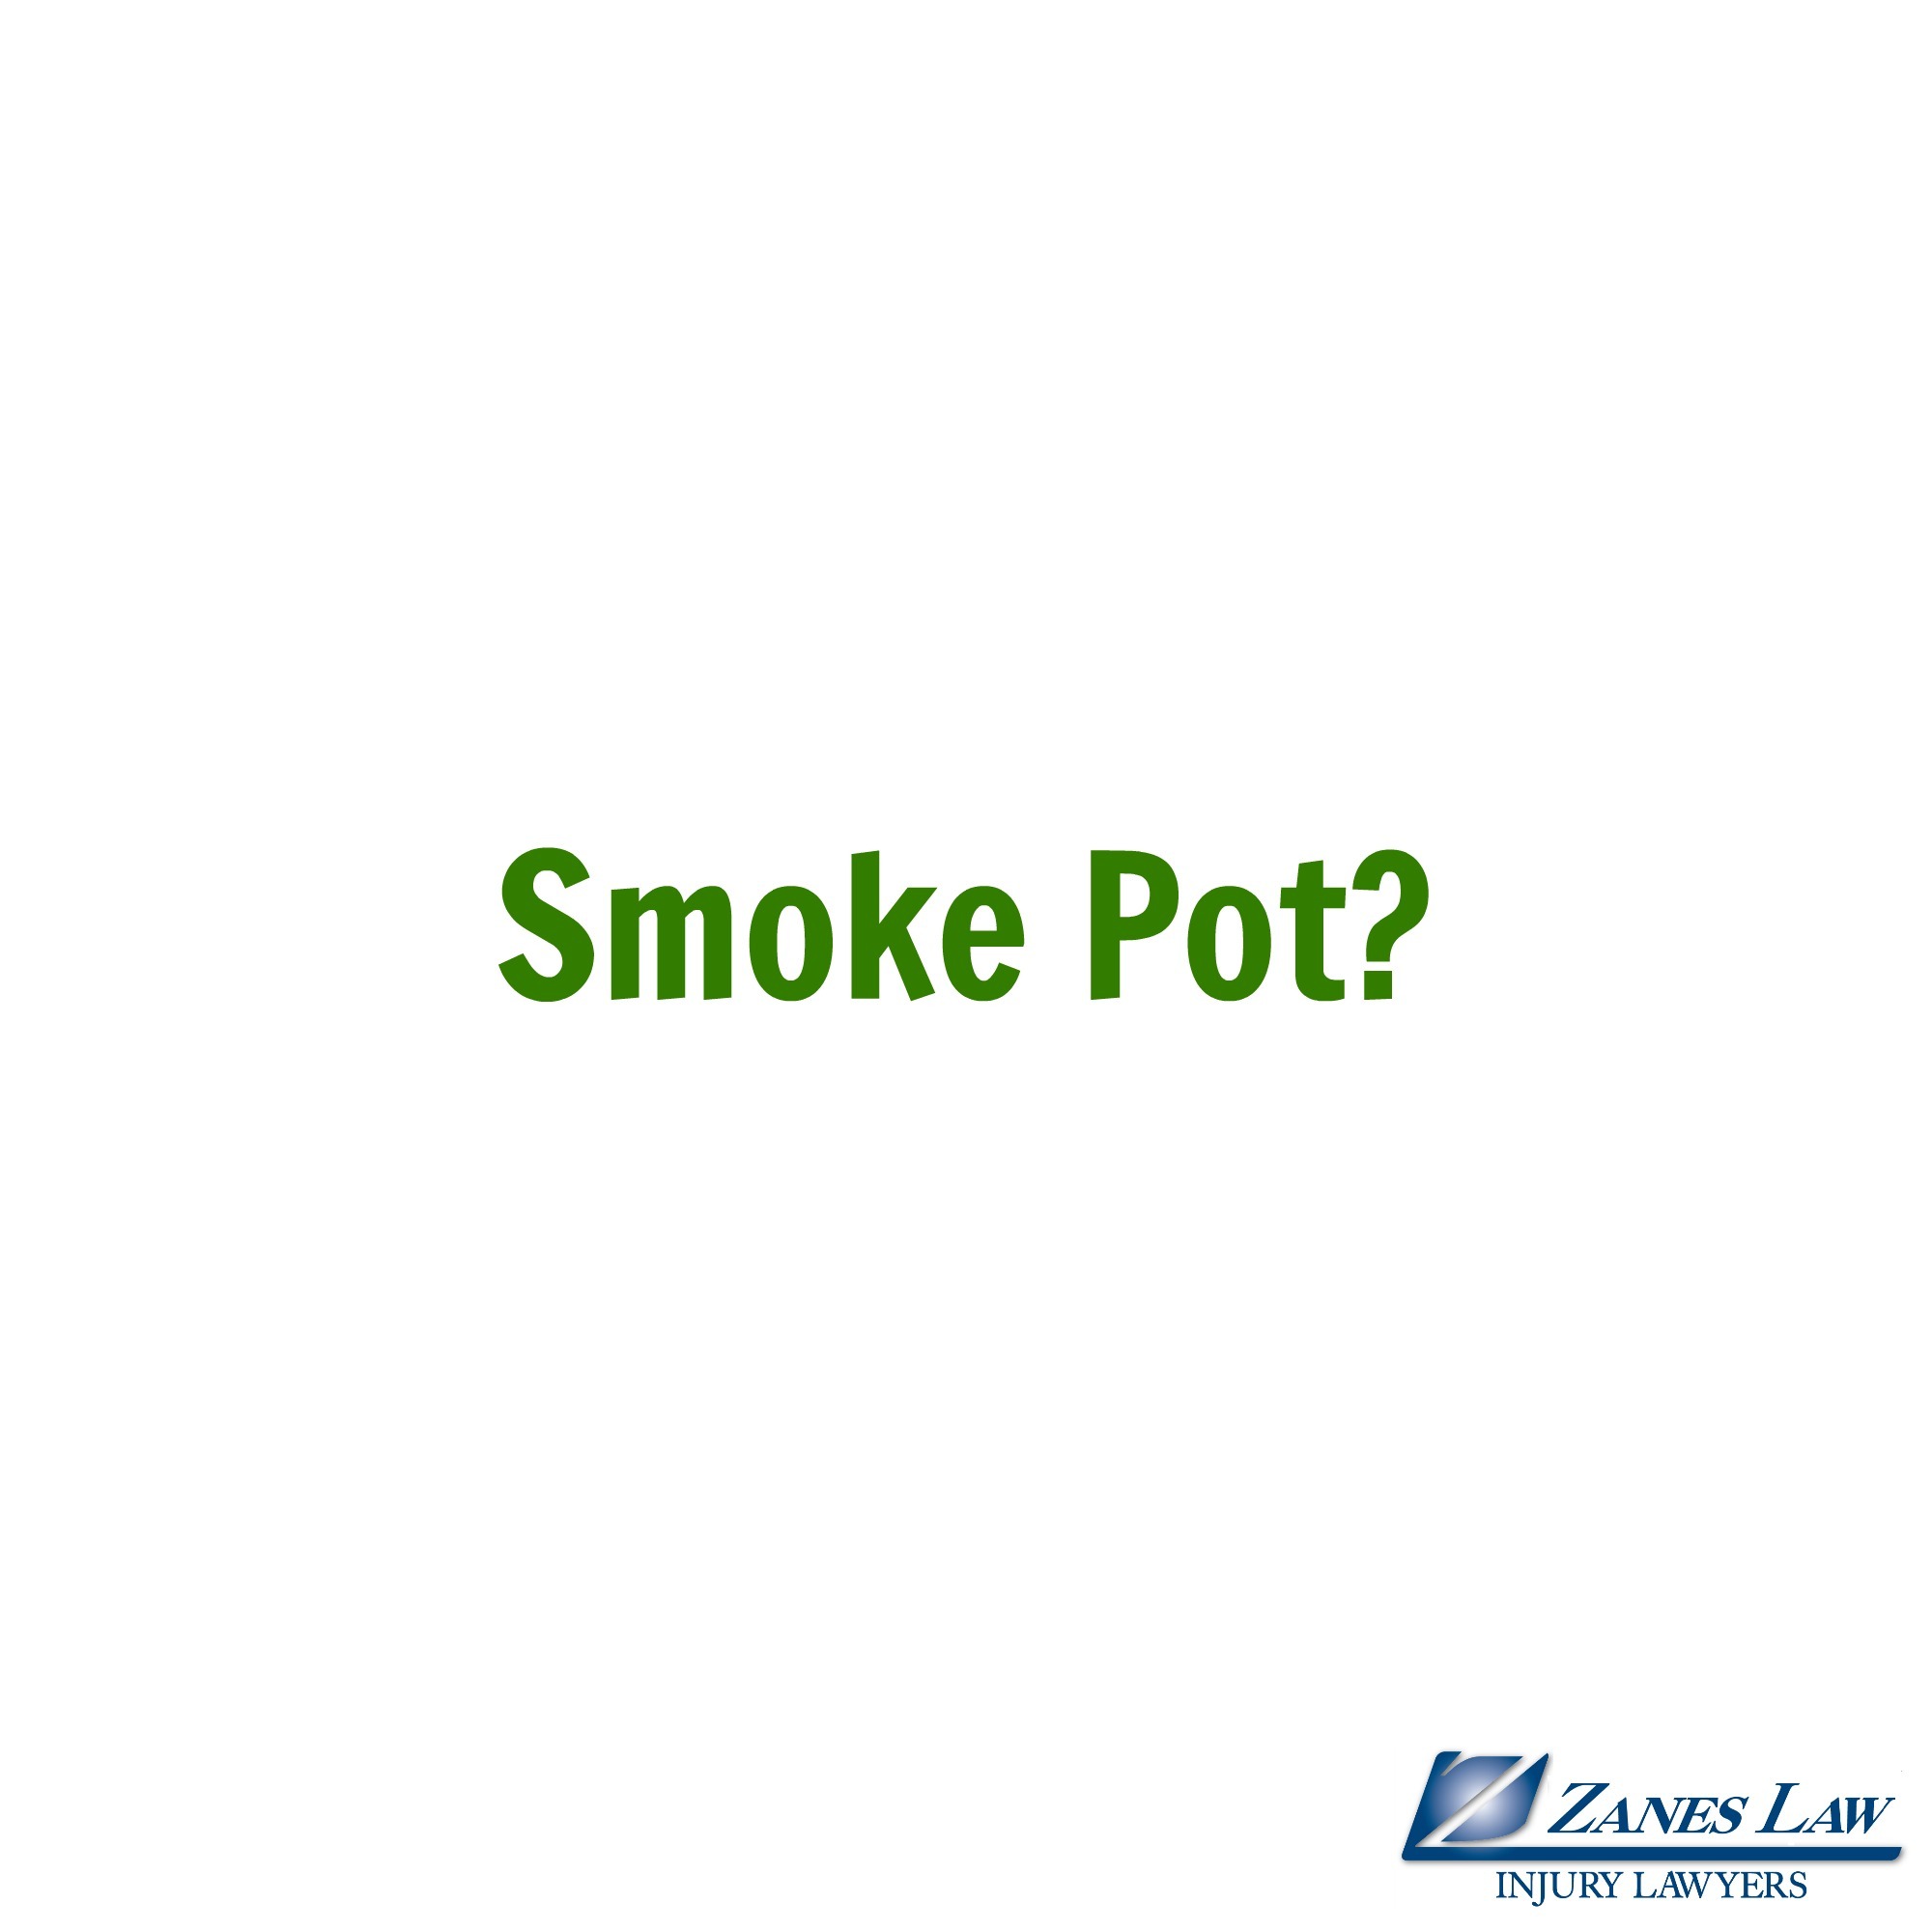 Smoke Pot? You Might Want to Read This!